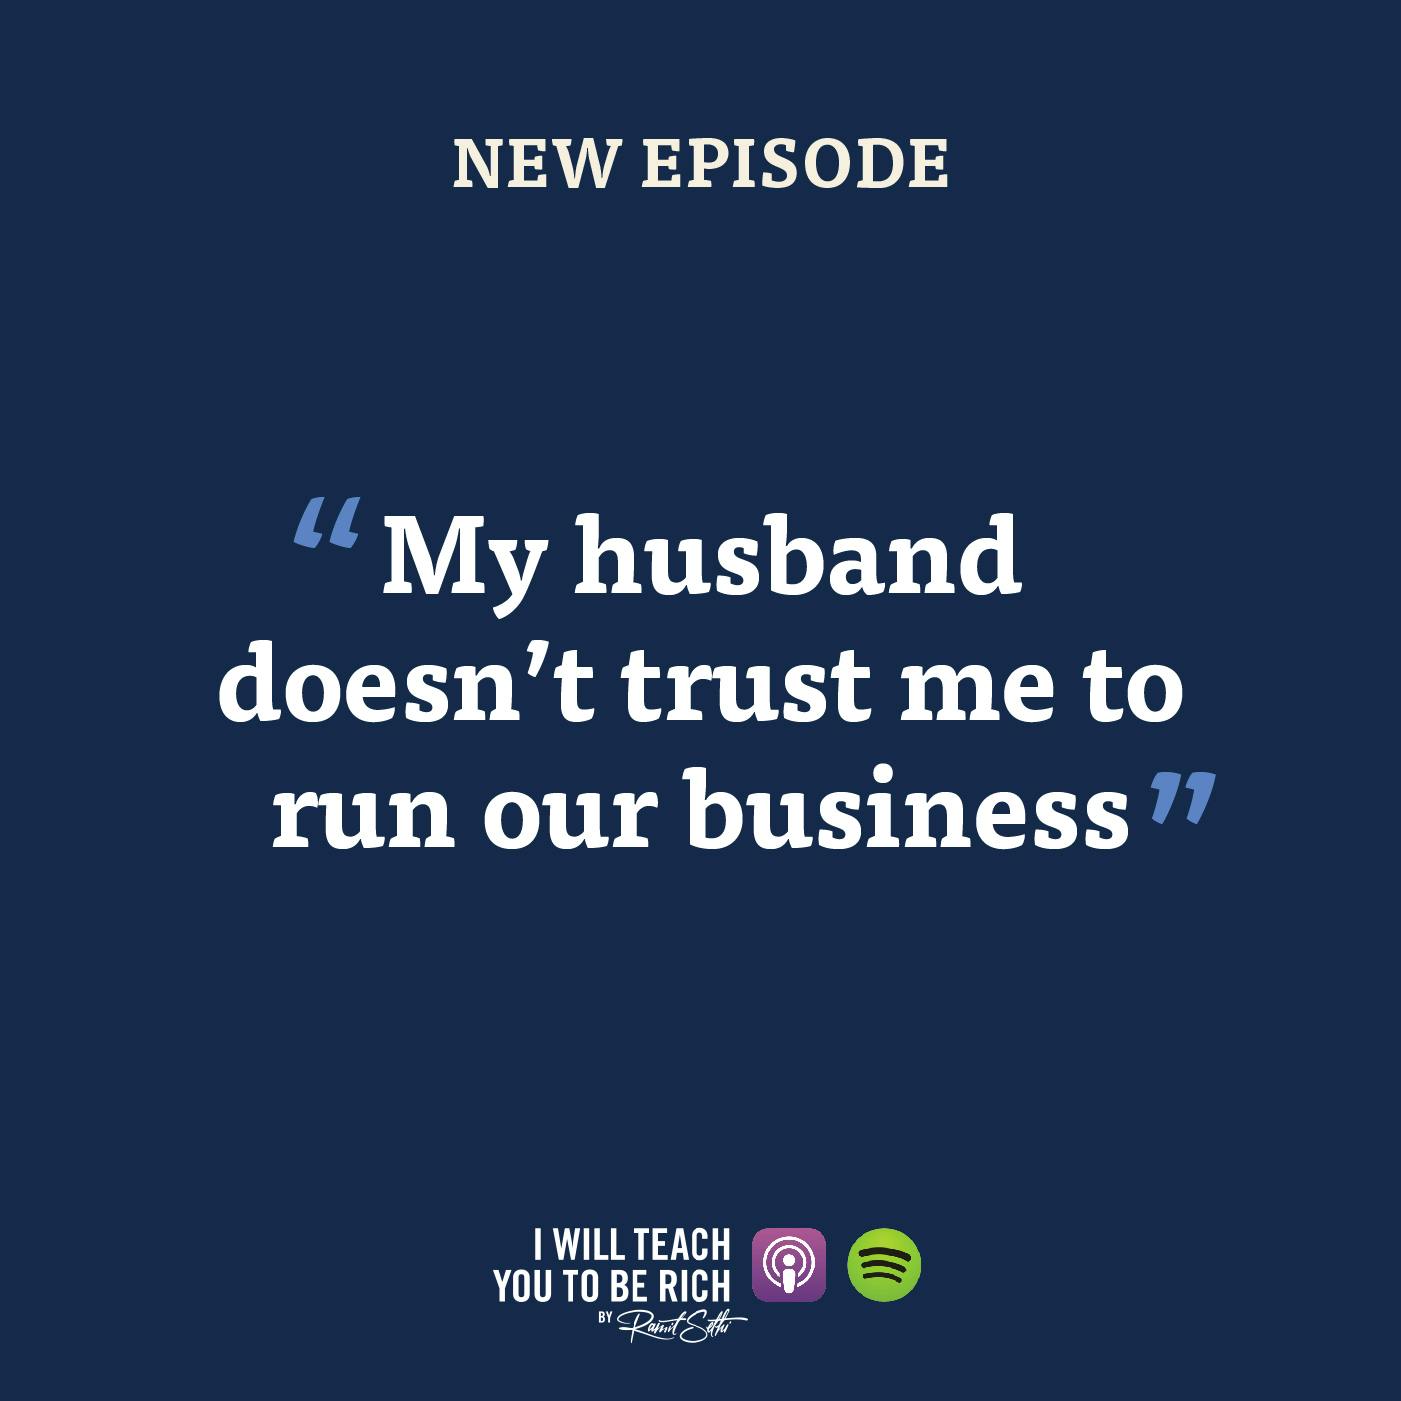 1. “My husband doesn’t trust me to run our business”